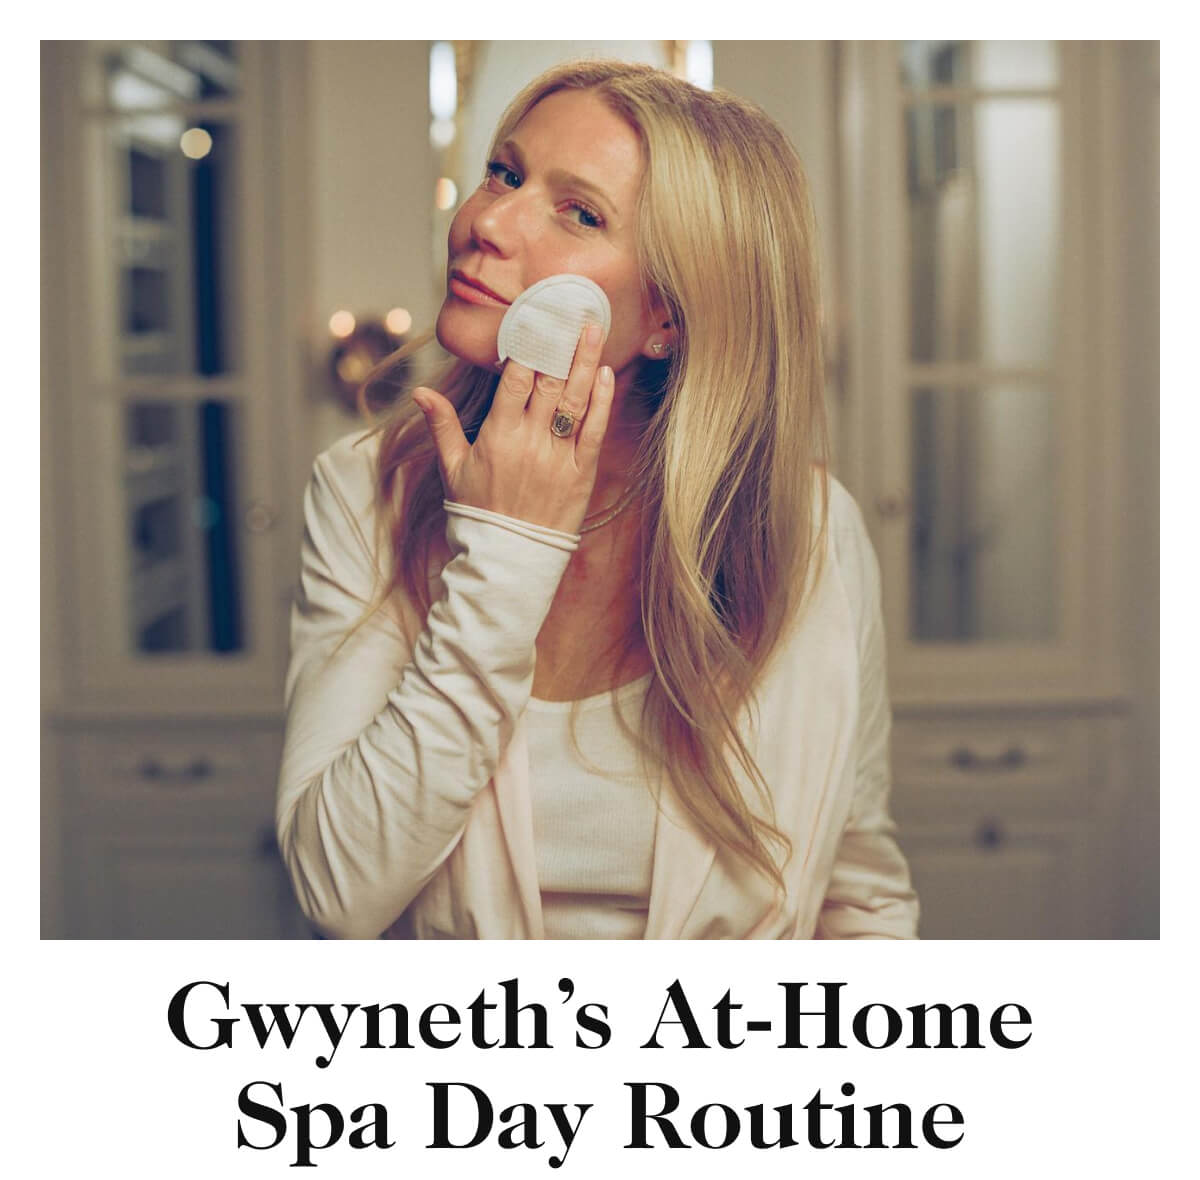 Gwyneth’s At-Home Spa Day Routine